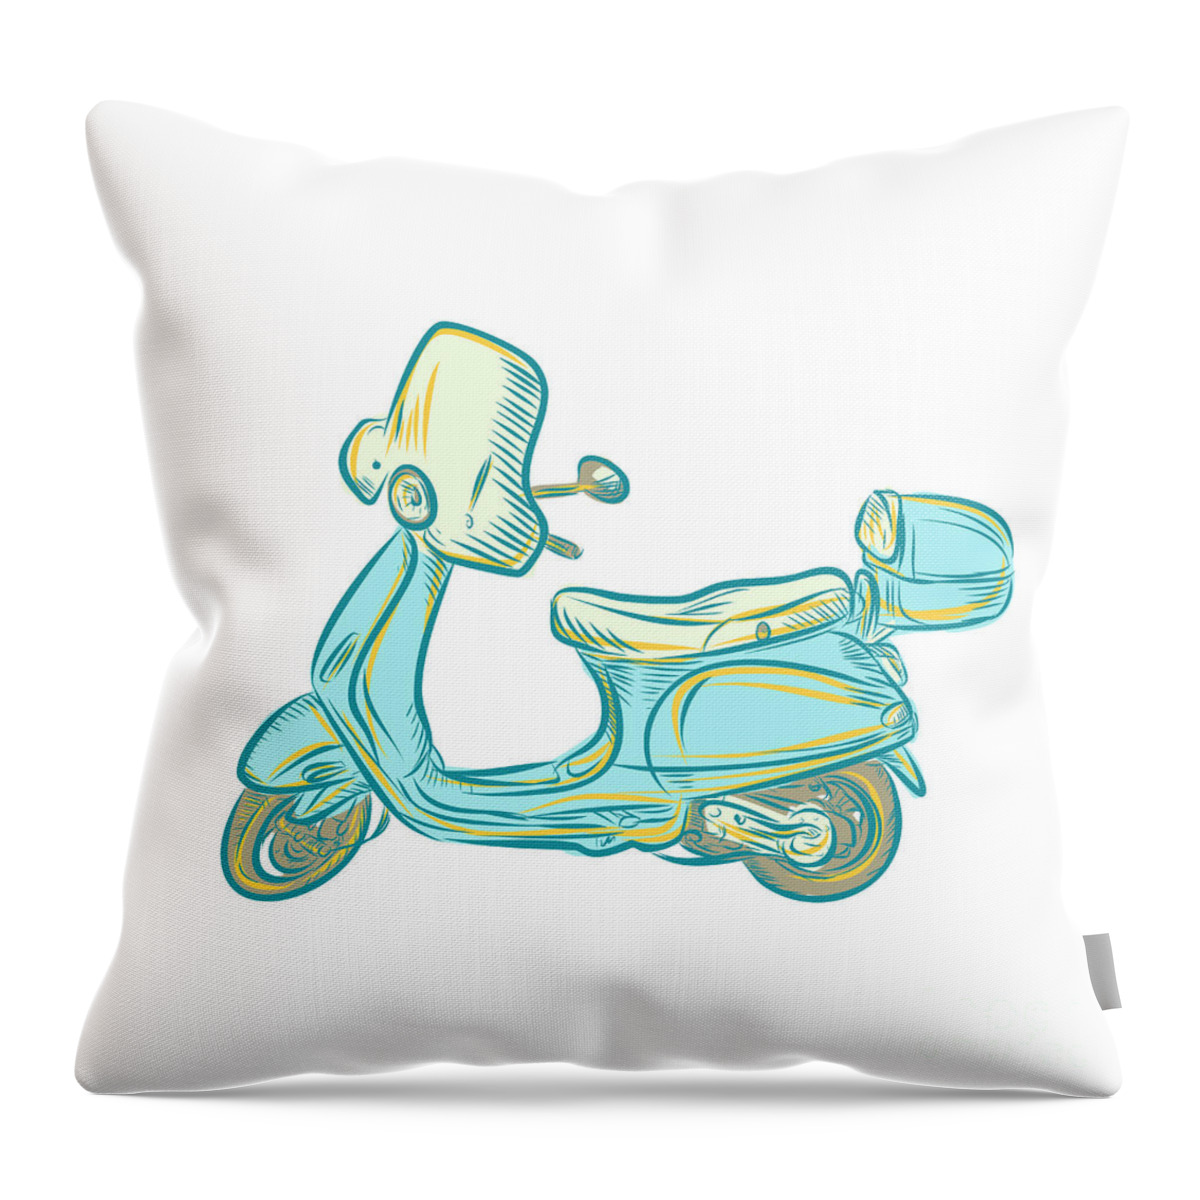 Etching Throw Pillow featuring the digital art Vintage Scooter Etching by Aloysius Patrimonio